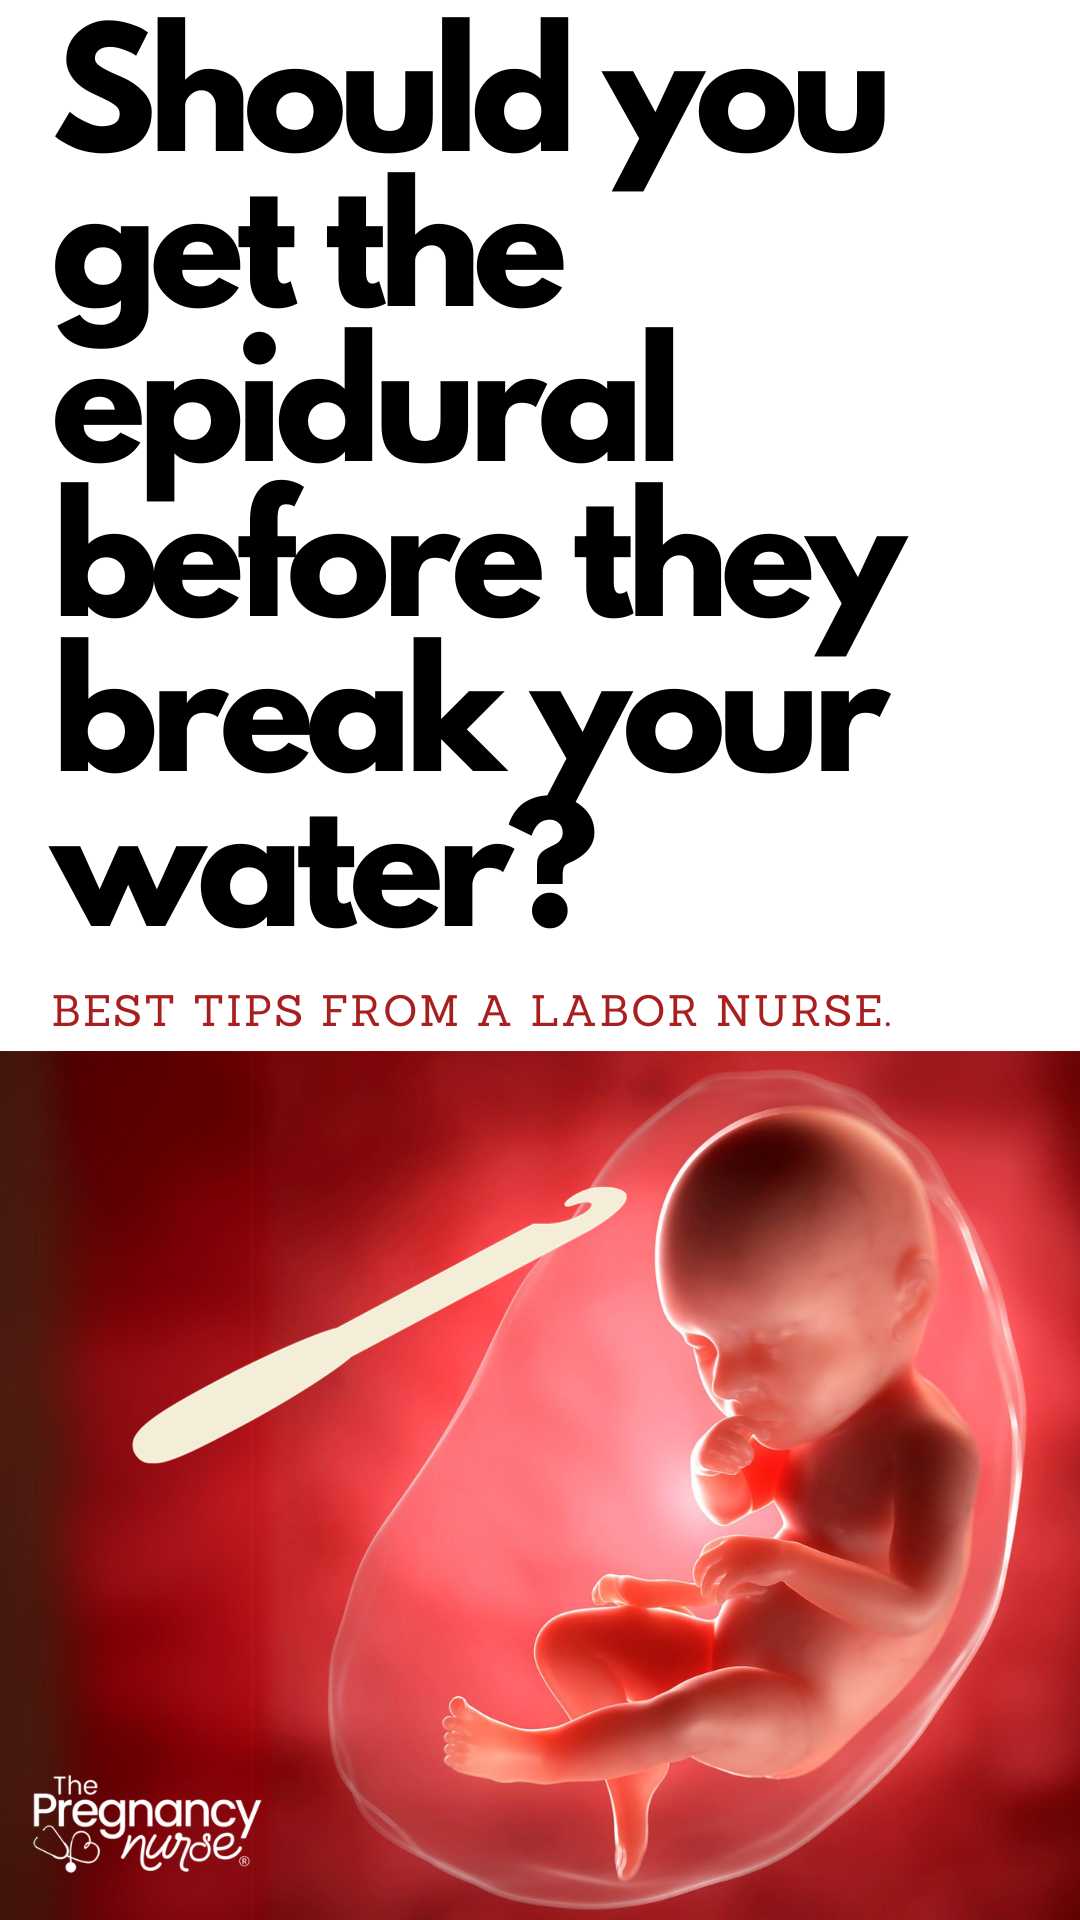 Overwhelmed by the complexities of labor choices? Let's demystify one of the most common questions - should you get a labor epidural before they break your water? Join the discussion and arm yourself with knowledge for your next prenatal checkup.